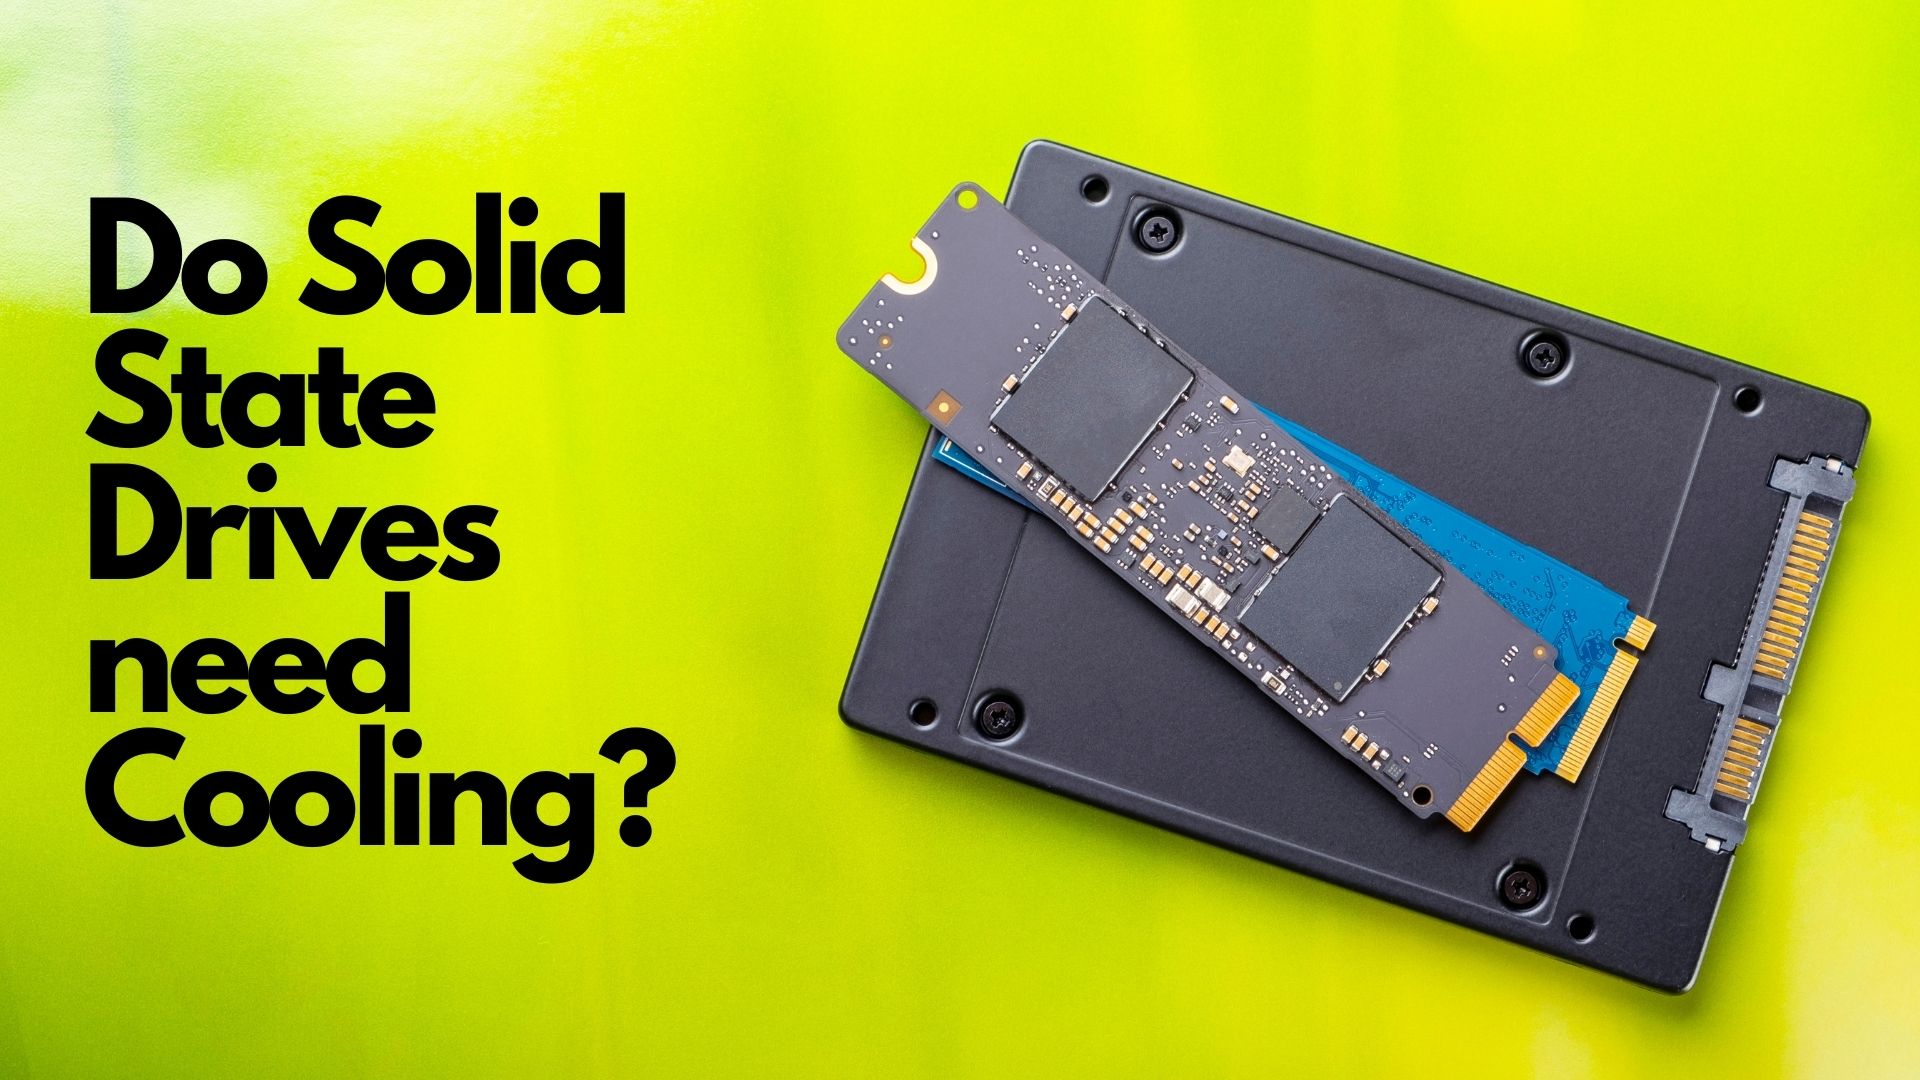 Do Solid State Drives need Cooling